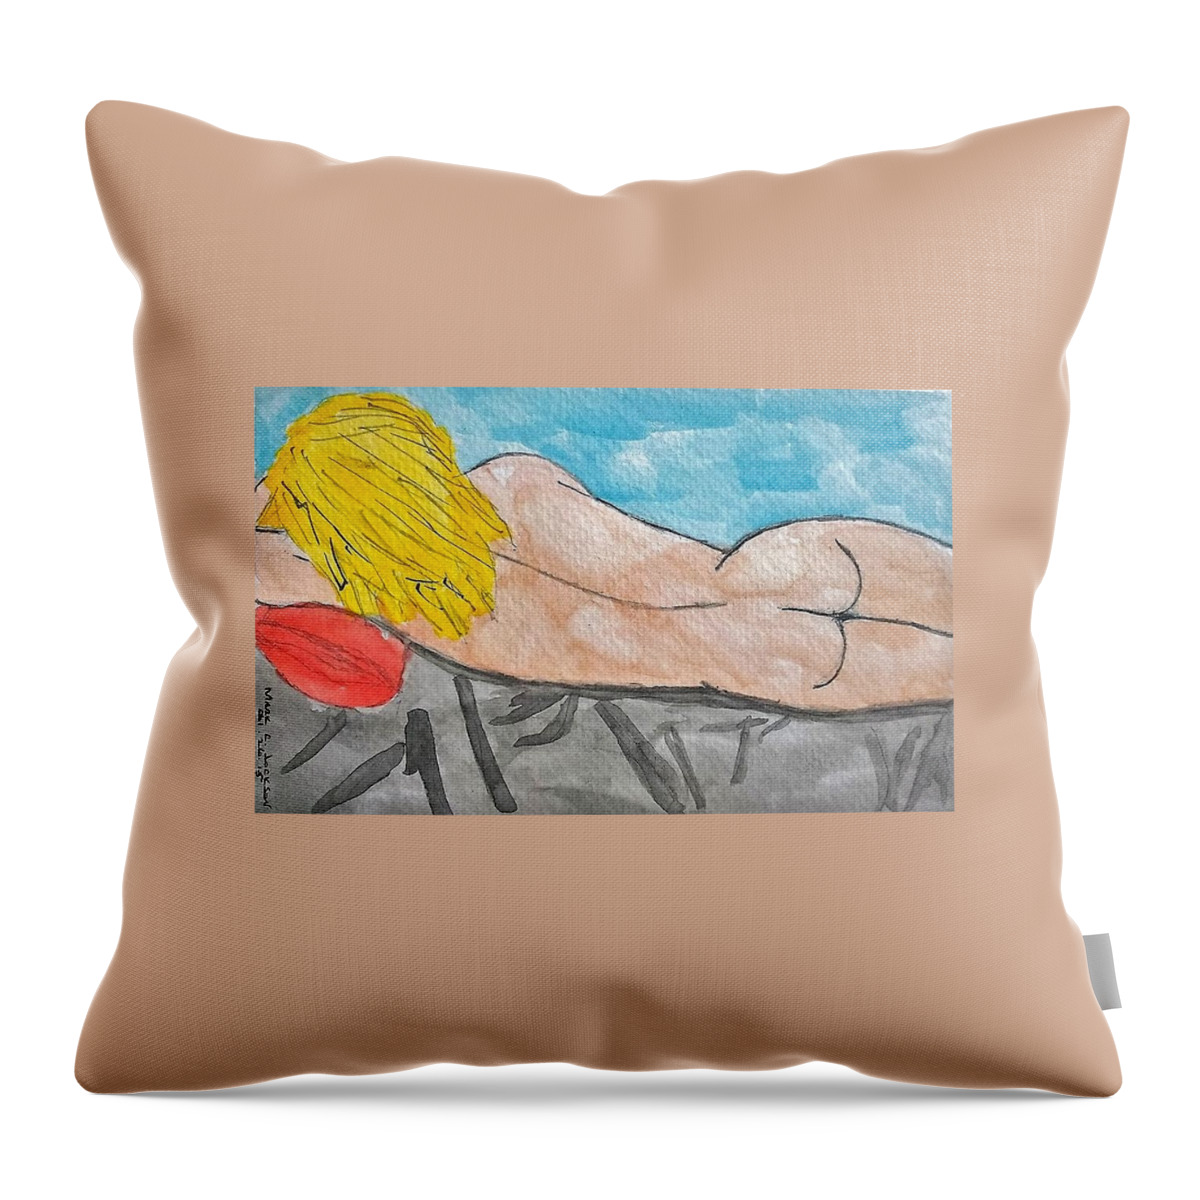 Nap Time Throw Pillow featuring the painting Nap Time by Mark C Jackson